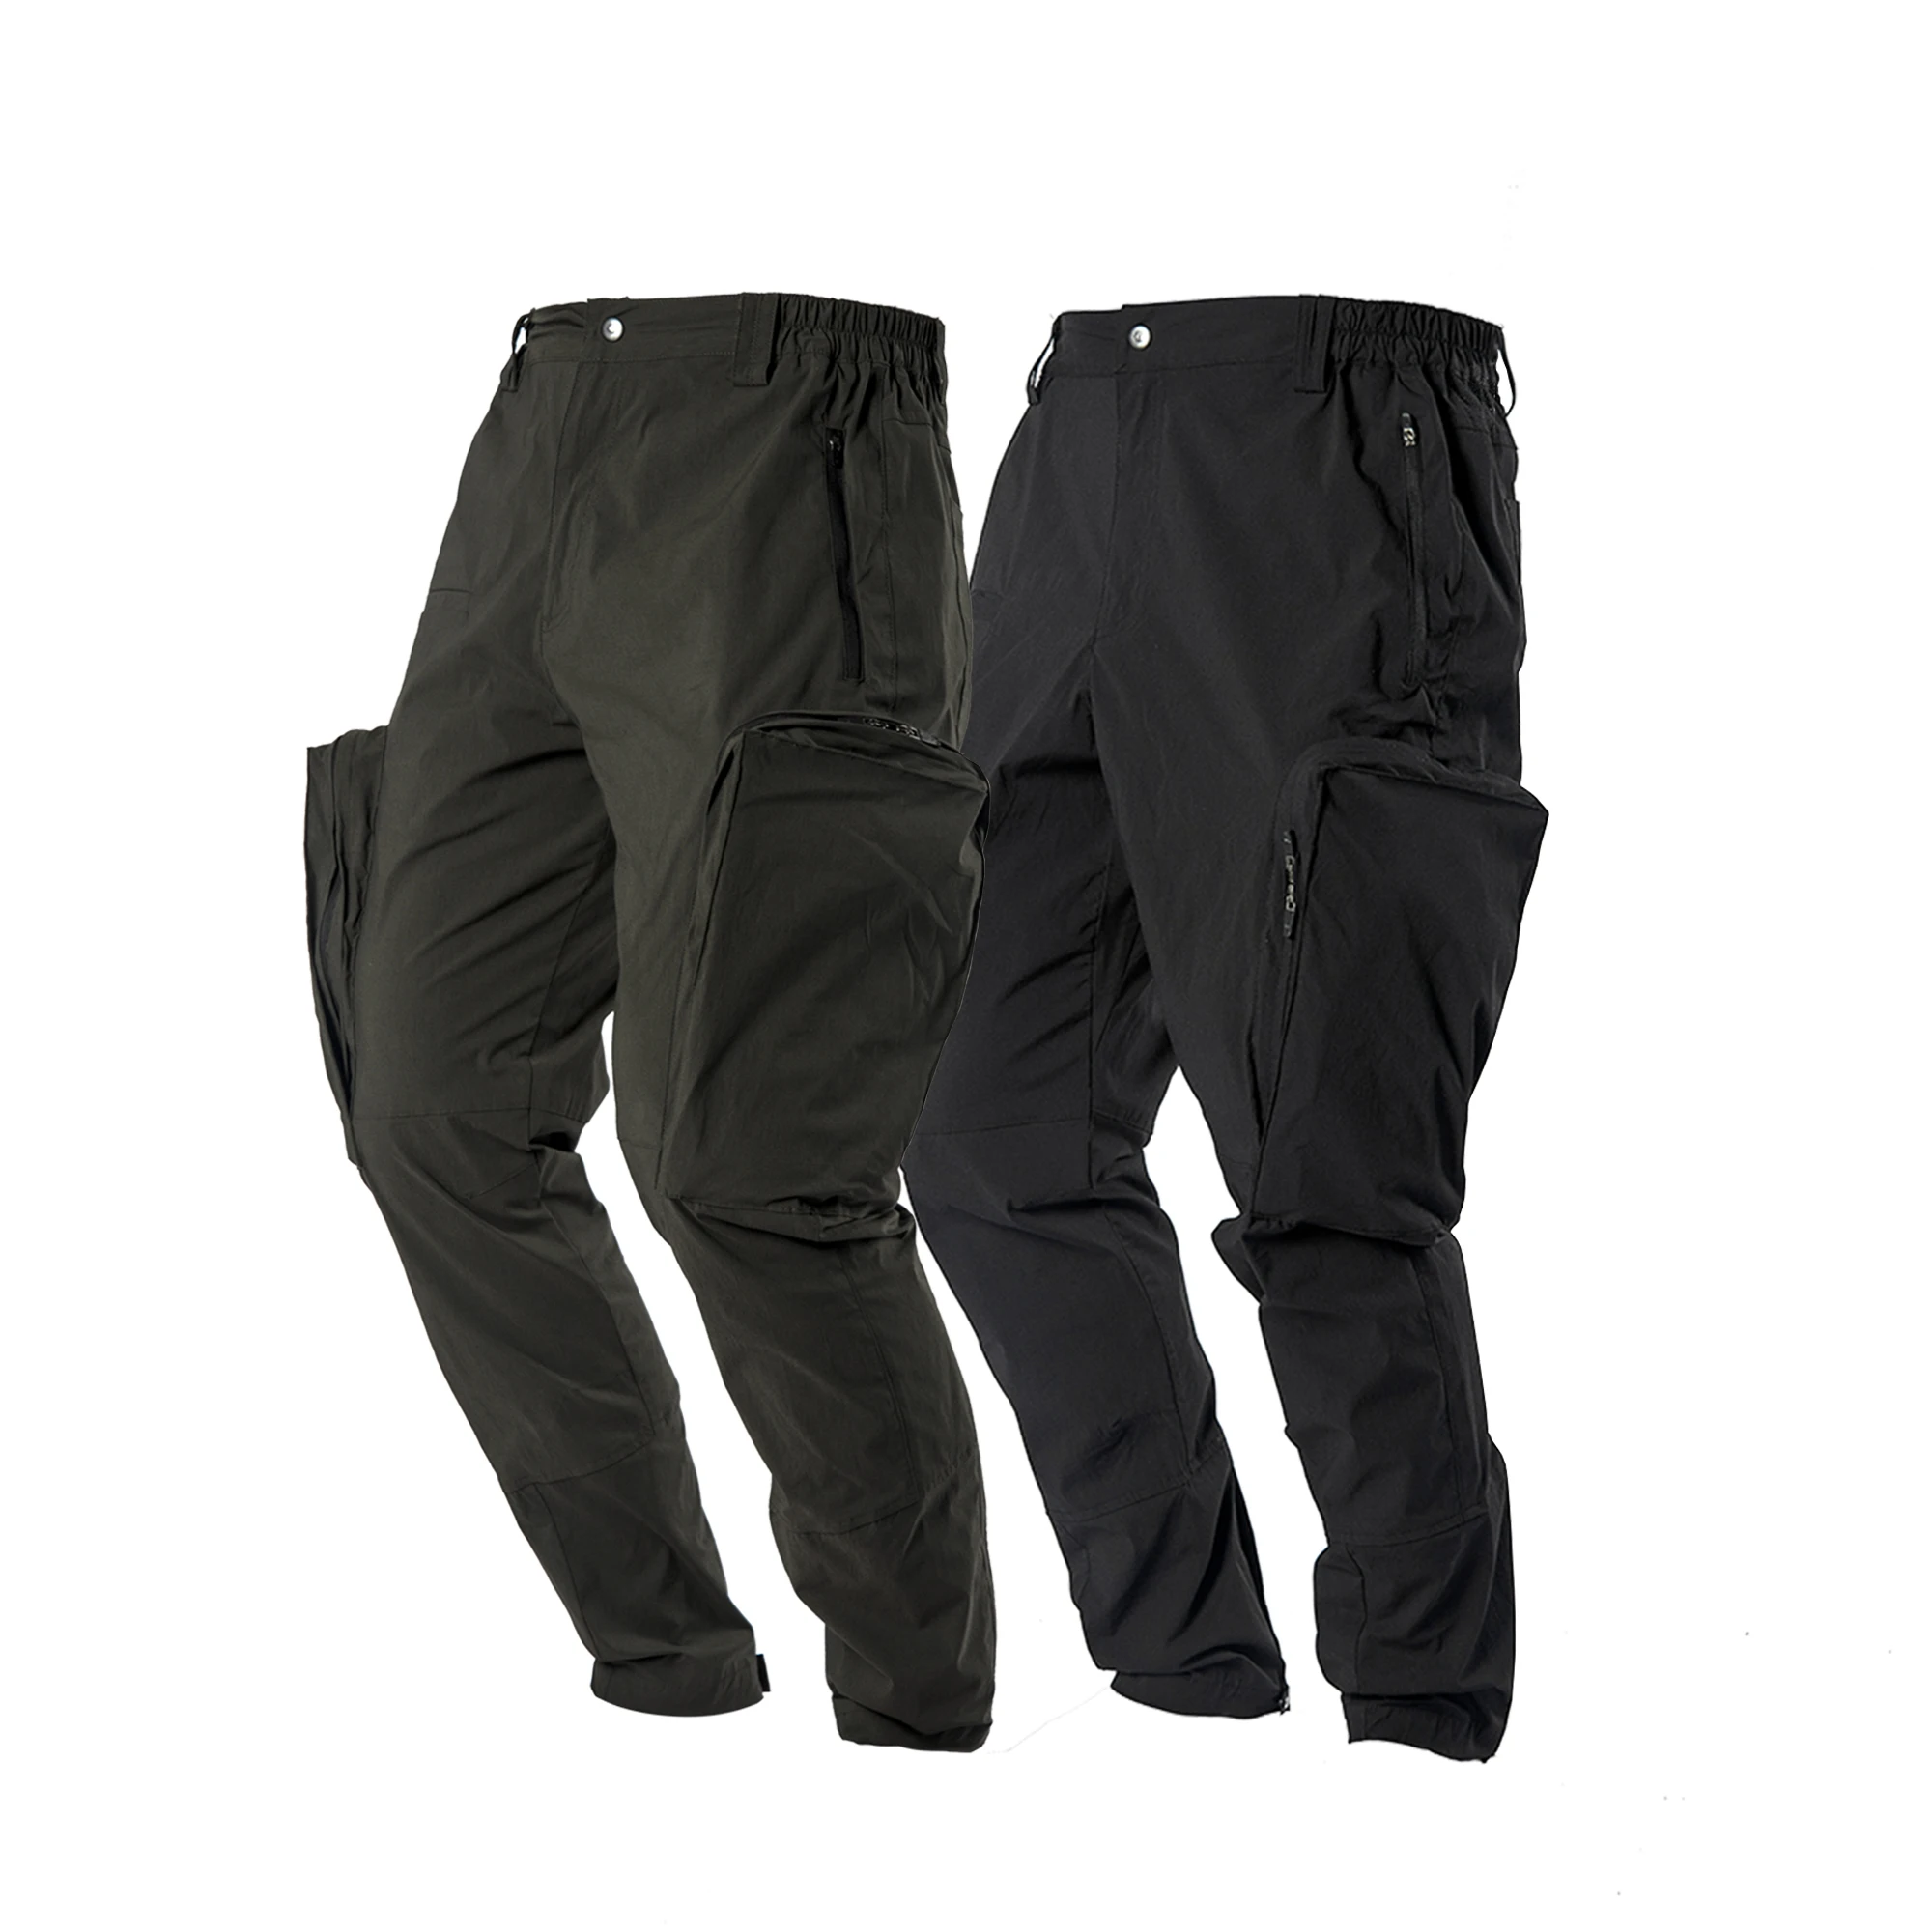 PUPIL TRAVEL 18SS New Pants Summer Men's Thin Style Techwear Overalls Bunched Feet Casual